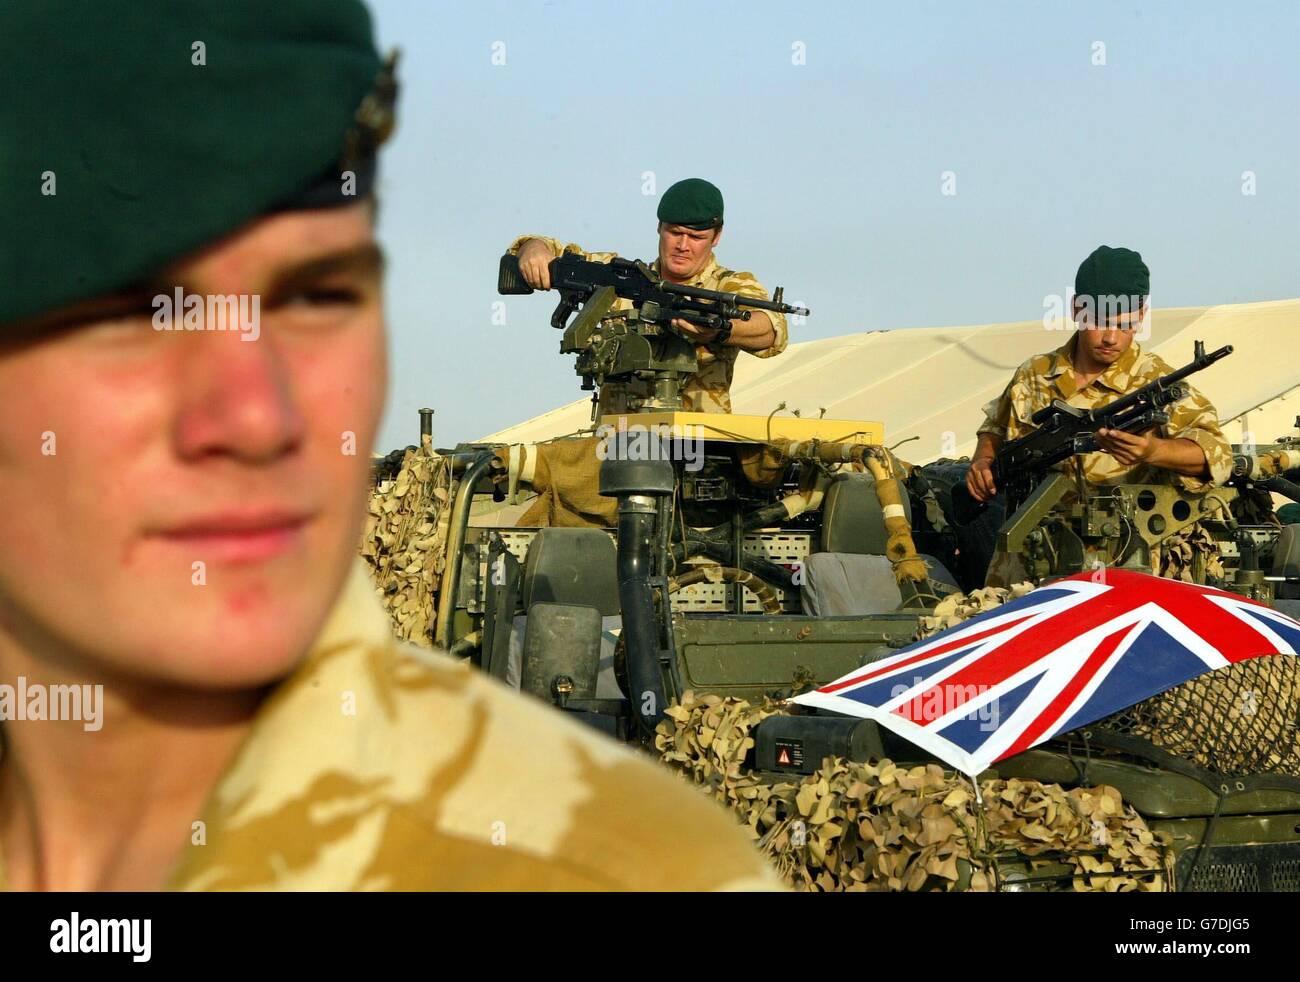 Craig Jones from Cardiff, a marine based at Shaibah Logistical Base With 40 Commando (home base Summerset, UK) looks on, as other members of his company get prepared to move out to help give support to the Black Watch at Camp Dogwood, 20 miles west of Baghdad. The 40 Commando Royal Marines is part of the Black Watch battle group, which will be operating in the area where the US 24 Marine Expeditionary Unit has been deployed. Stock Photo